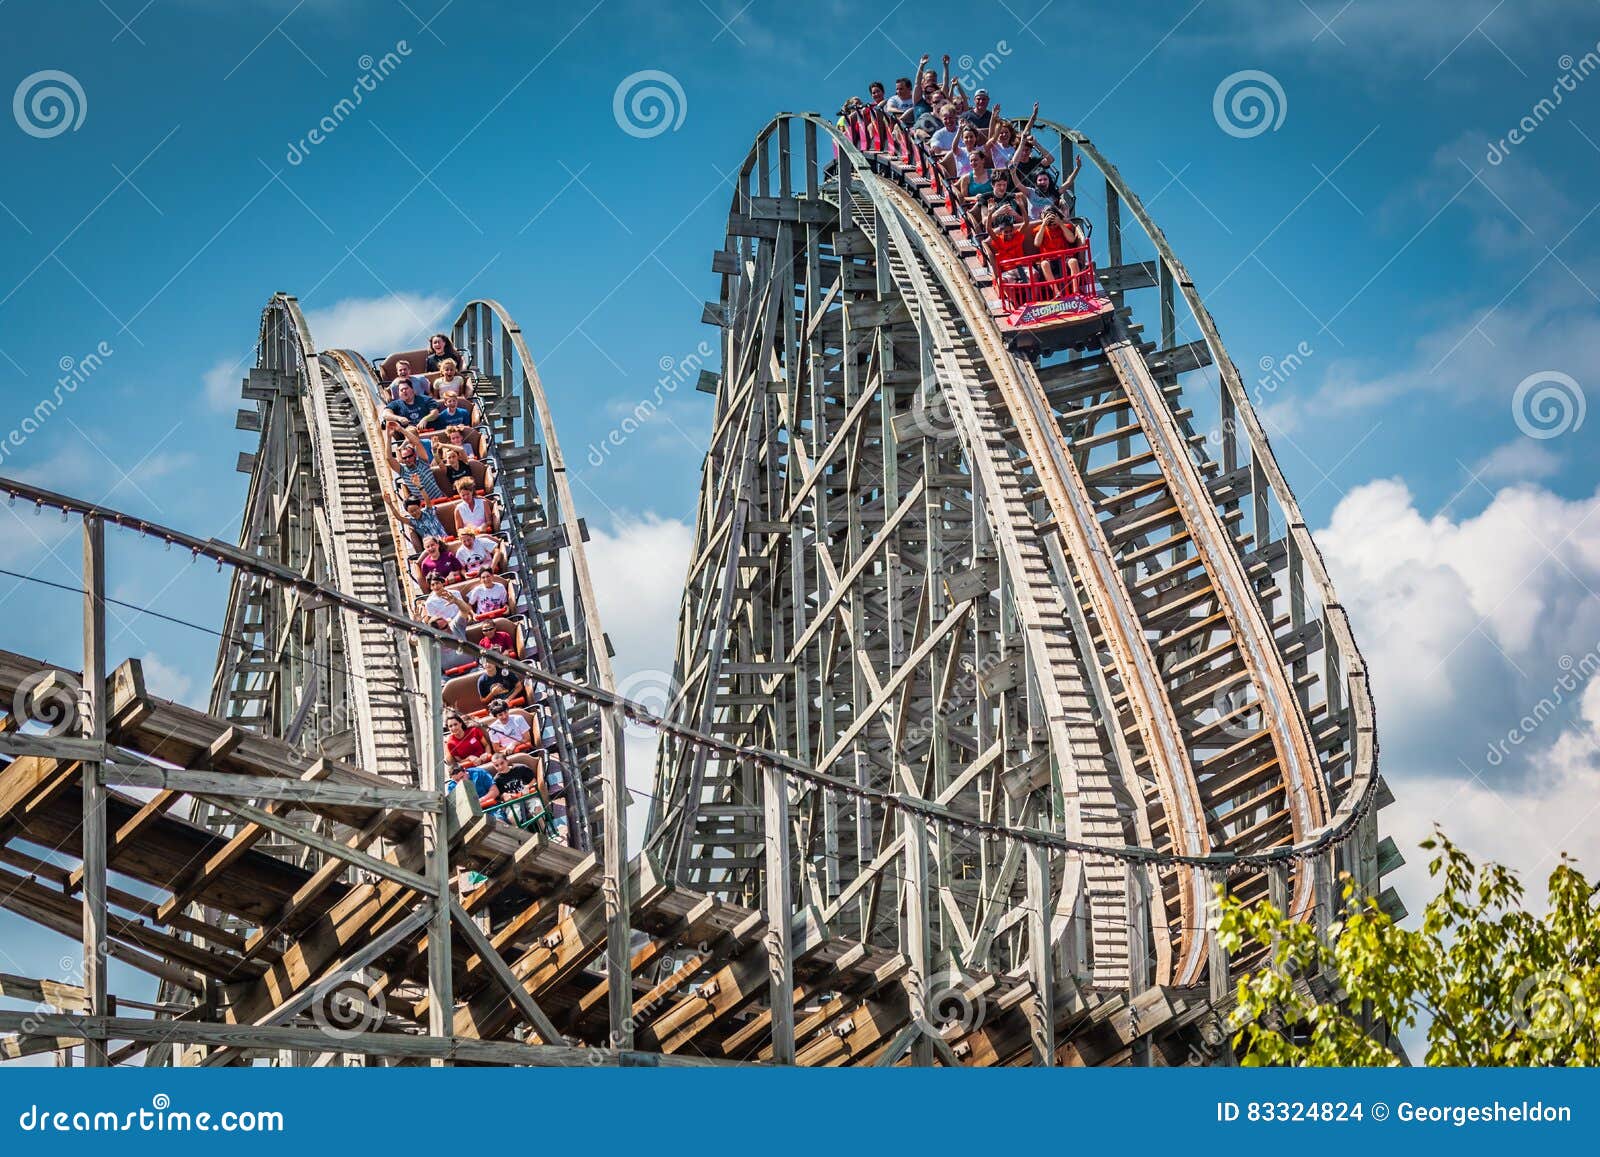 Lightning Racer Coaster in Hershey PA Editorial Stock Image - Image of ...